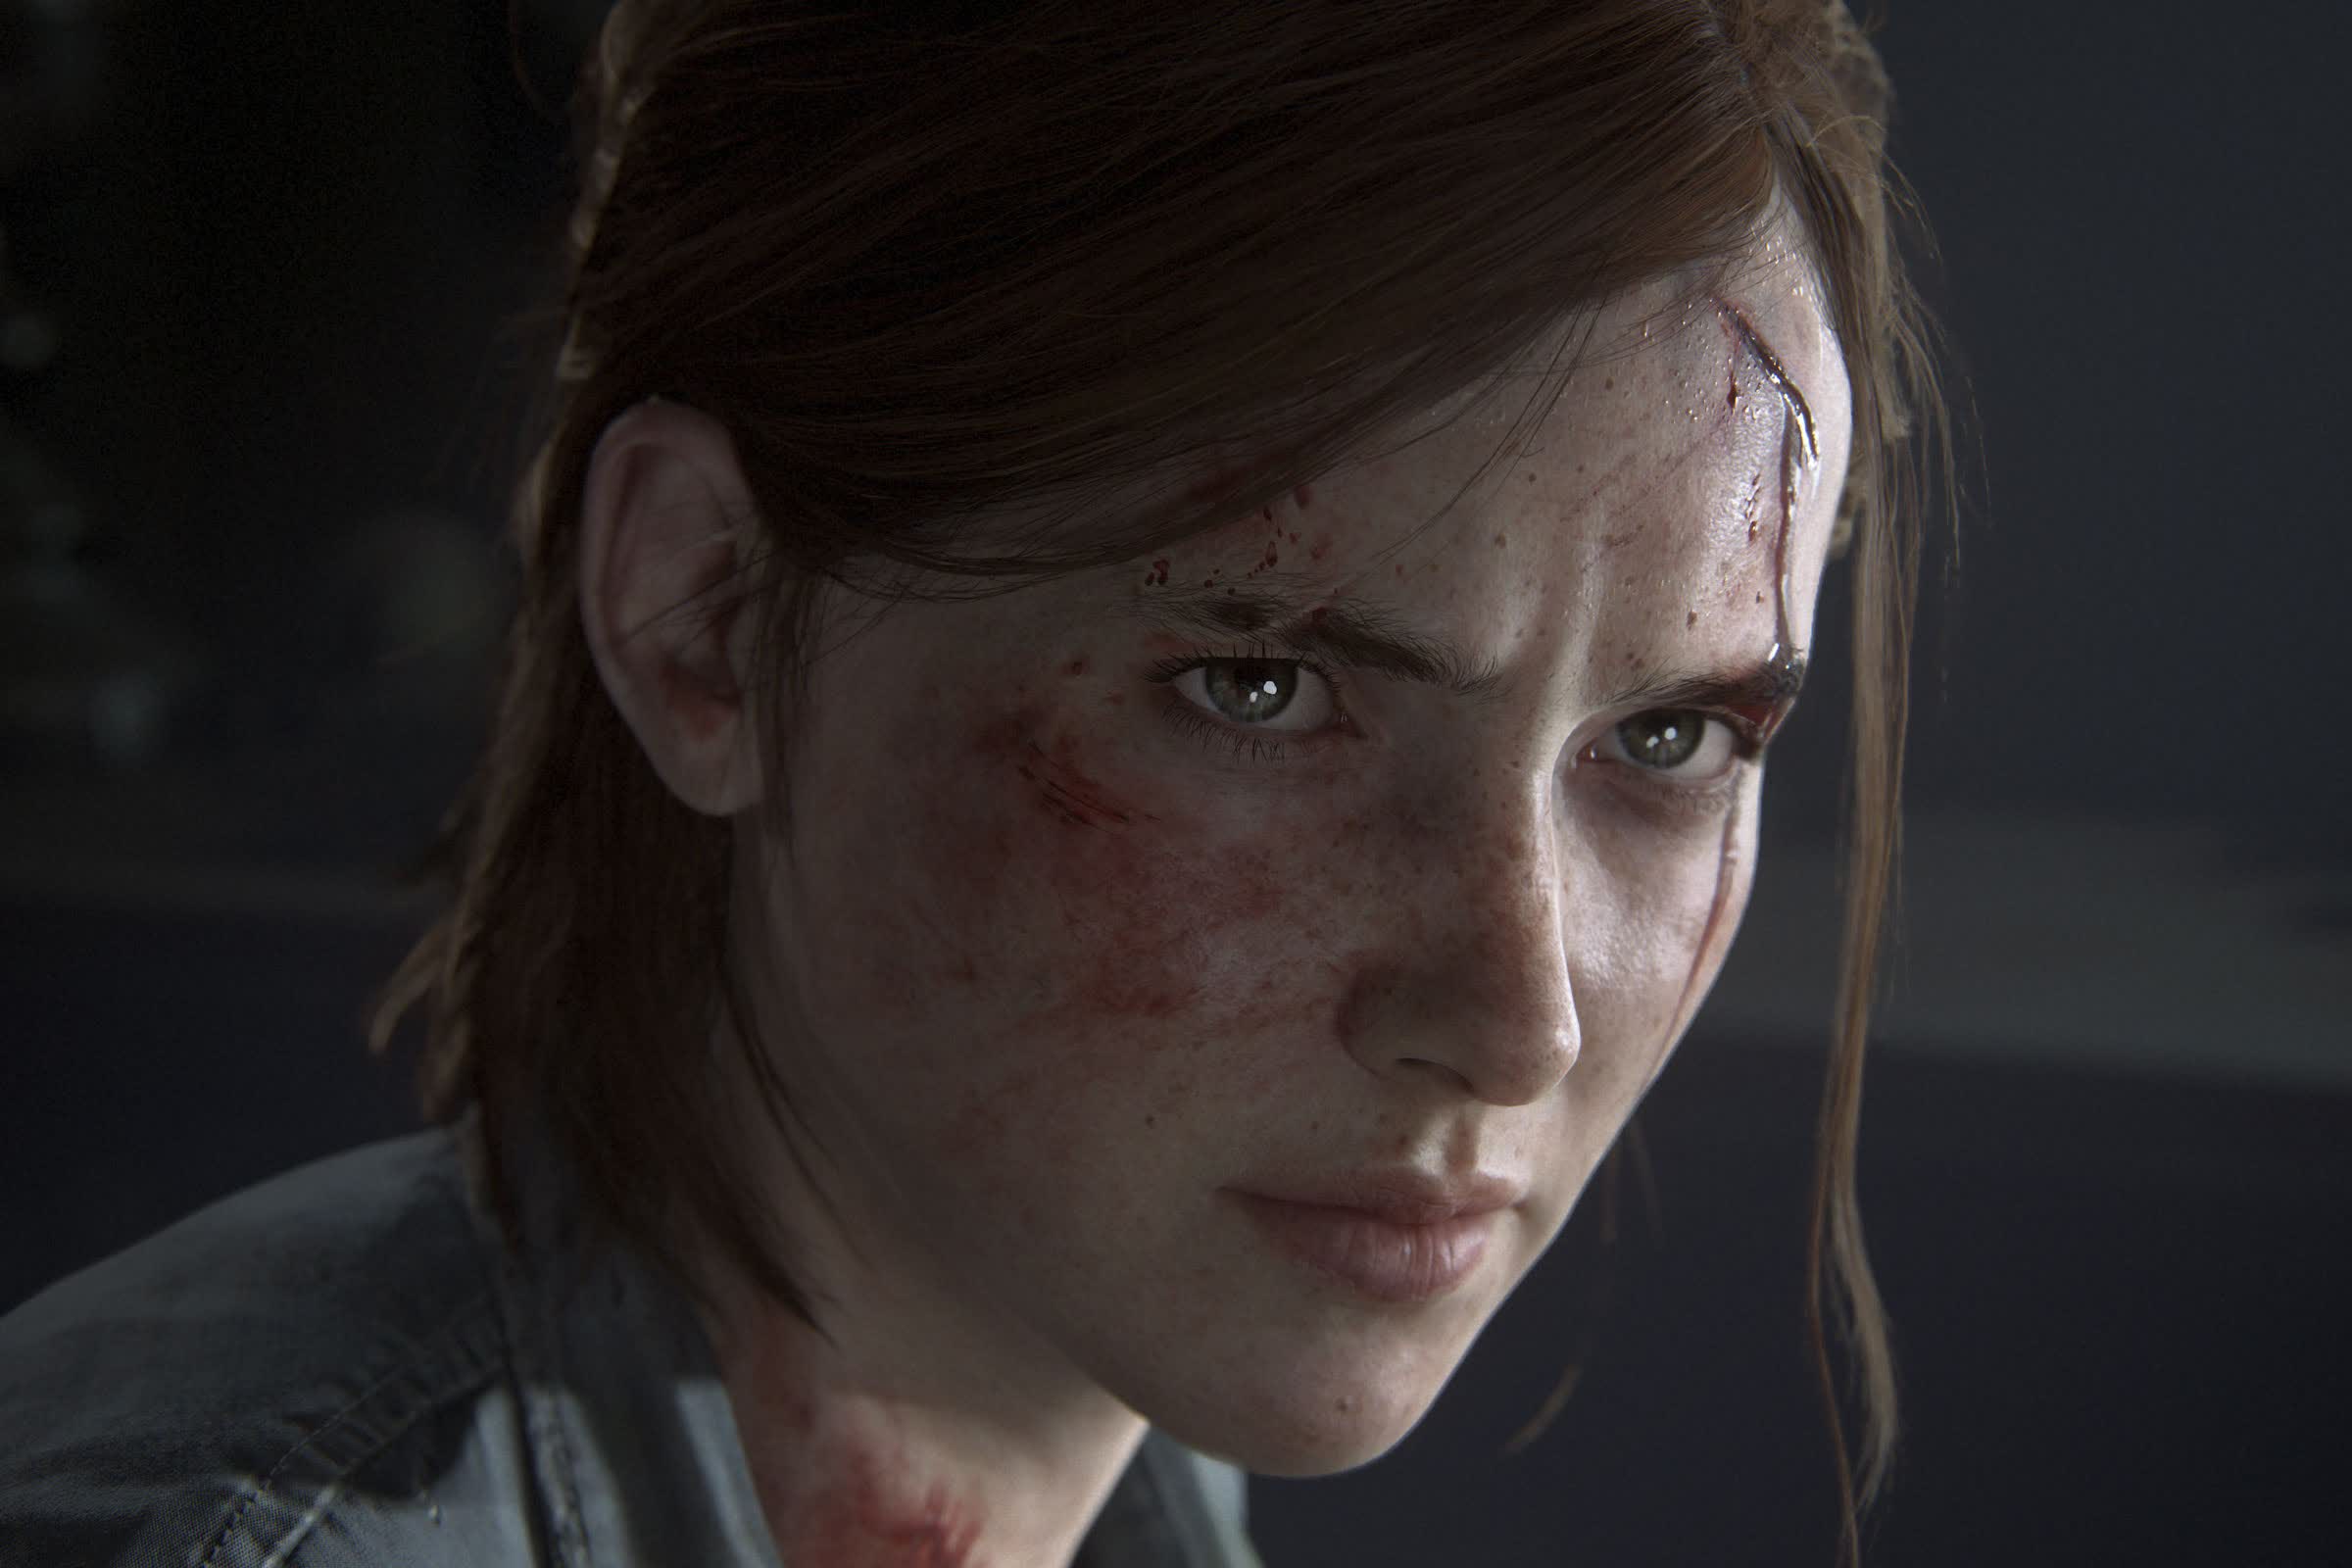 E3 2020 analysis shows significant shift toward female protagonists in games